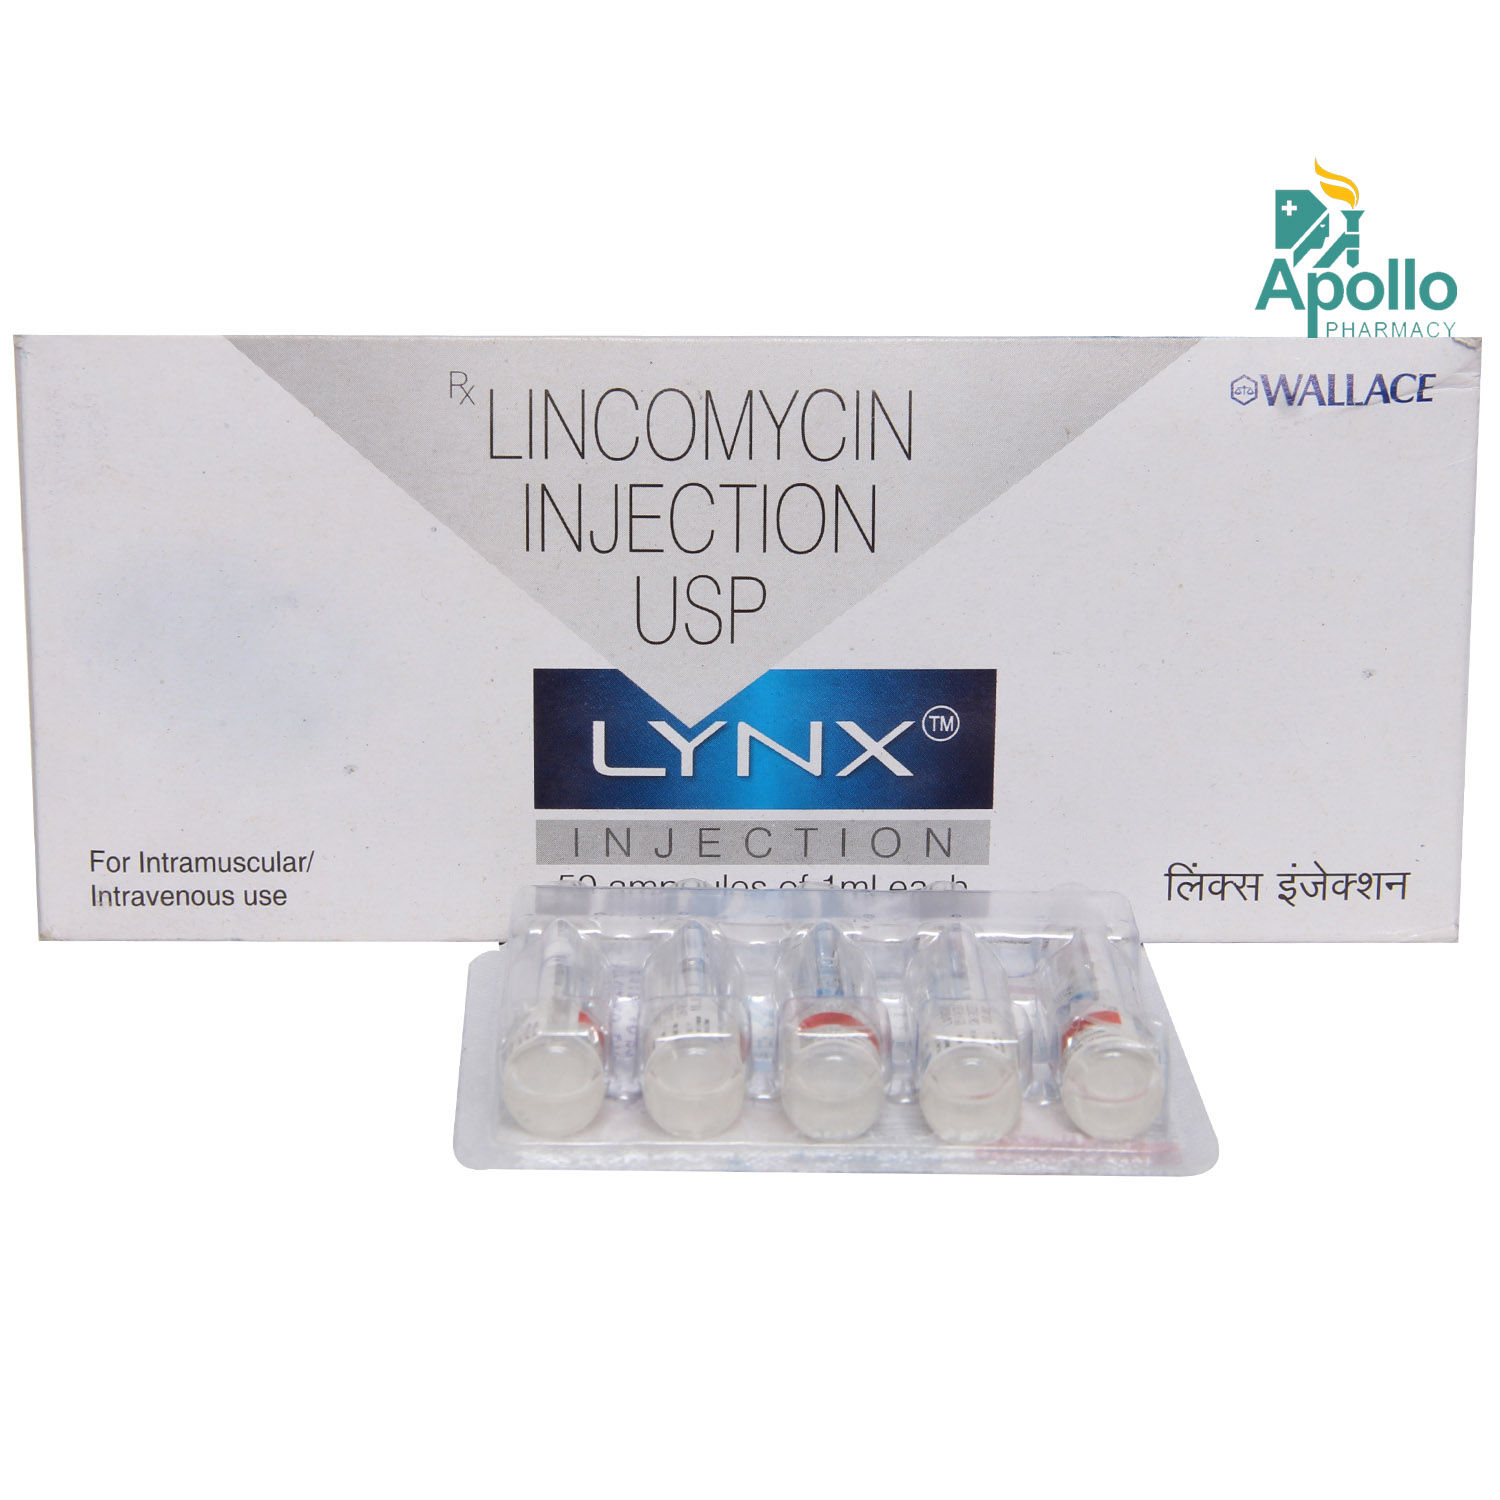 LYNX 300MG INJECTION 1ML Price, Uses, Side Effects, Composition